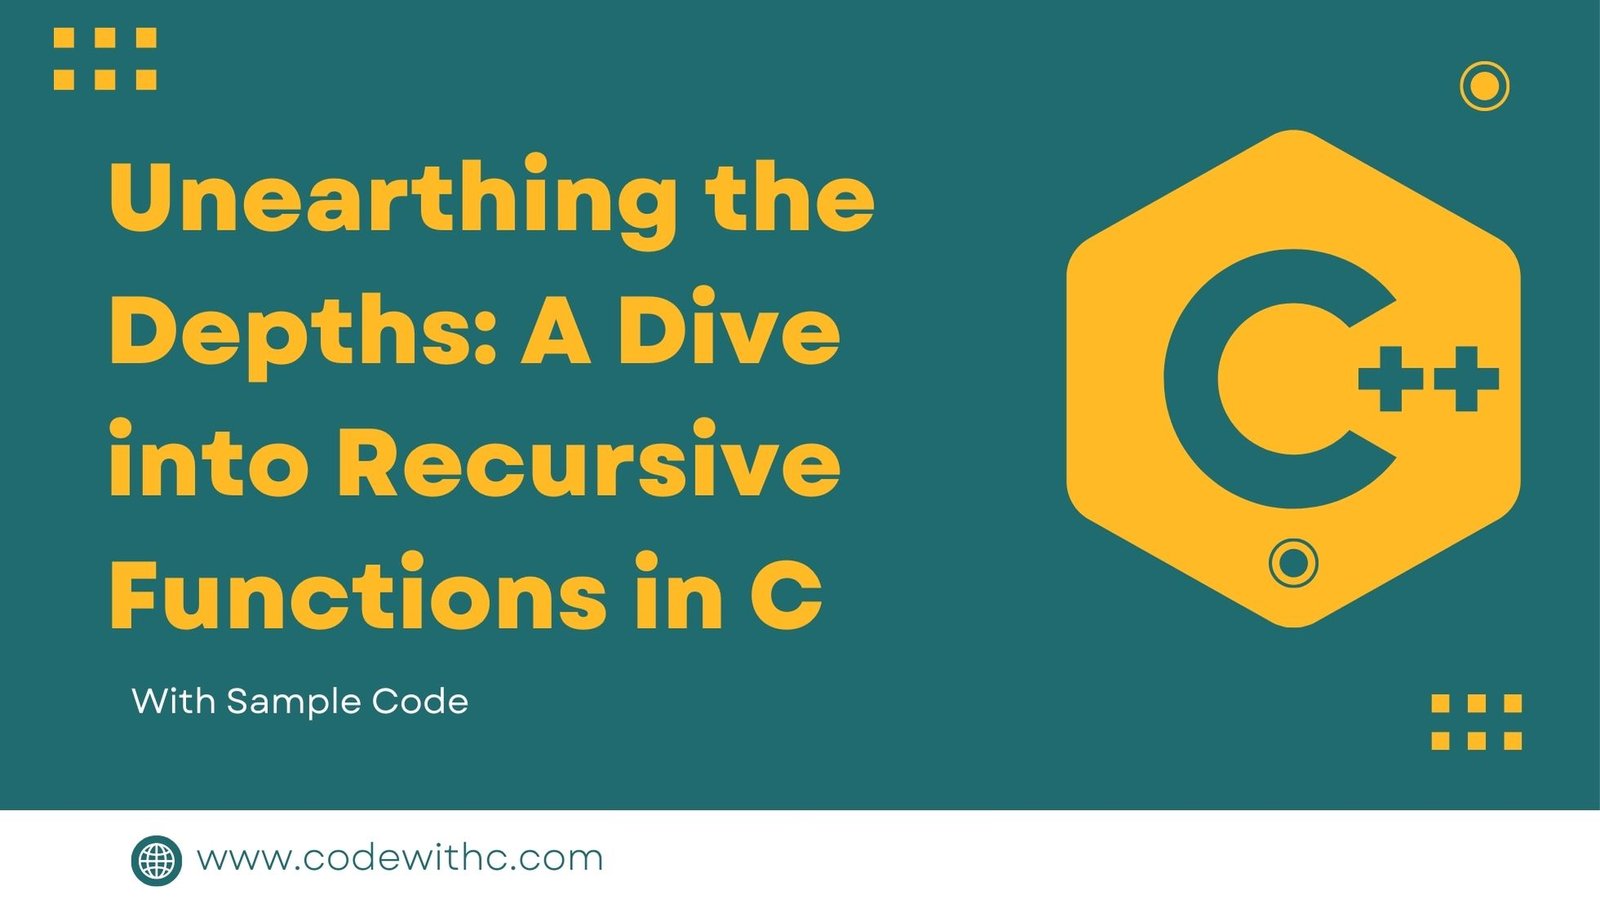 Unearthing the Depths A Dive into Recursive Functions in C